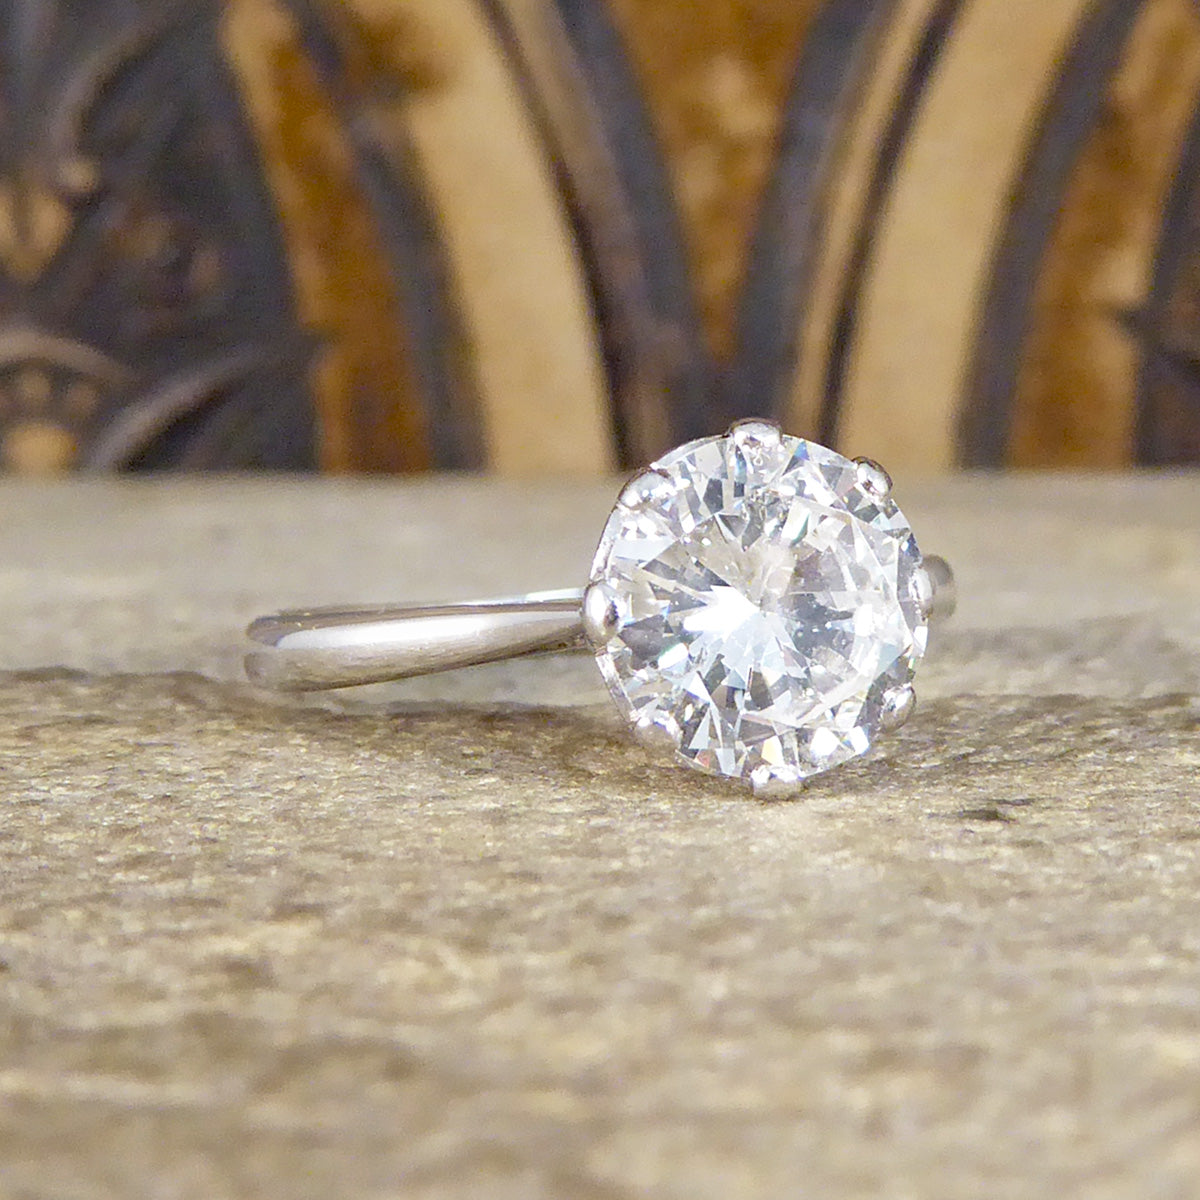 1930's 1.77ct Round Brilliant Cut Diamond Solitaire Engagement Ring in 18ct White Gold and Platinum